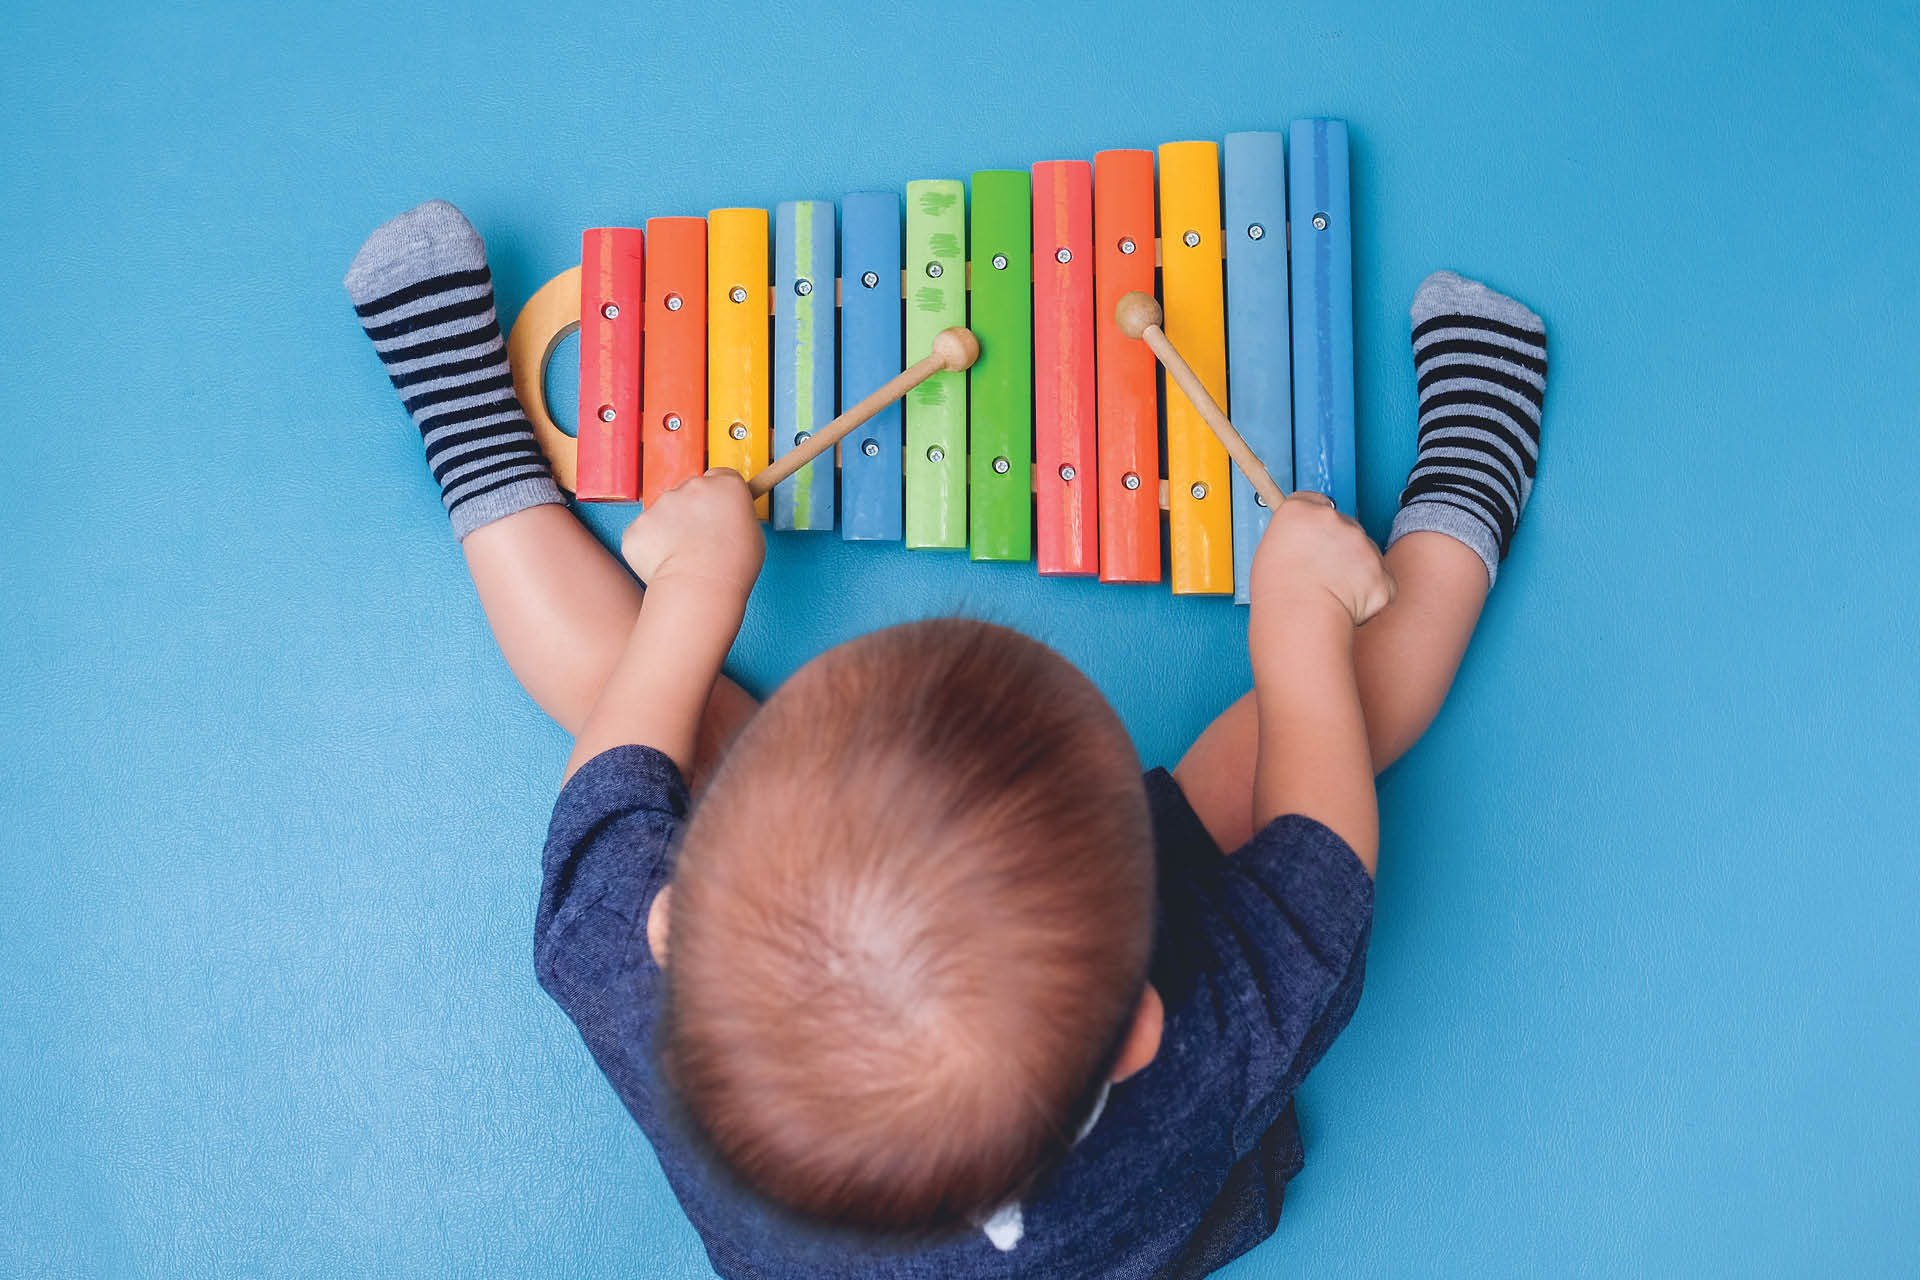 Toddler playing on xylophone